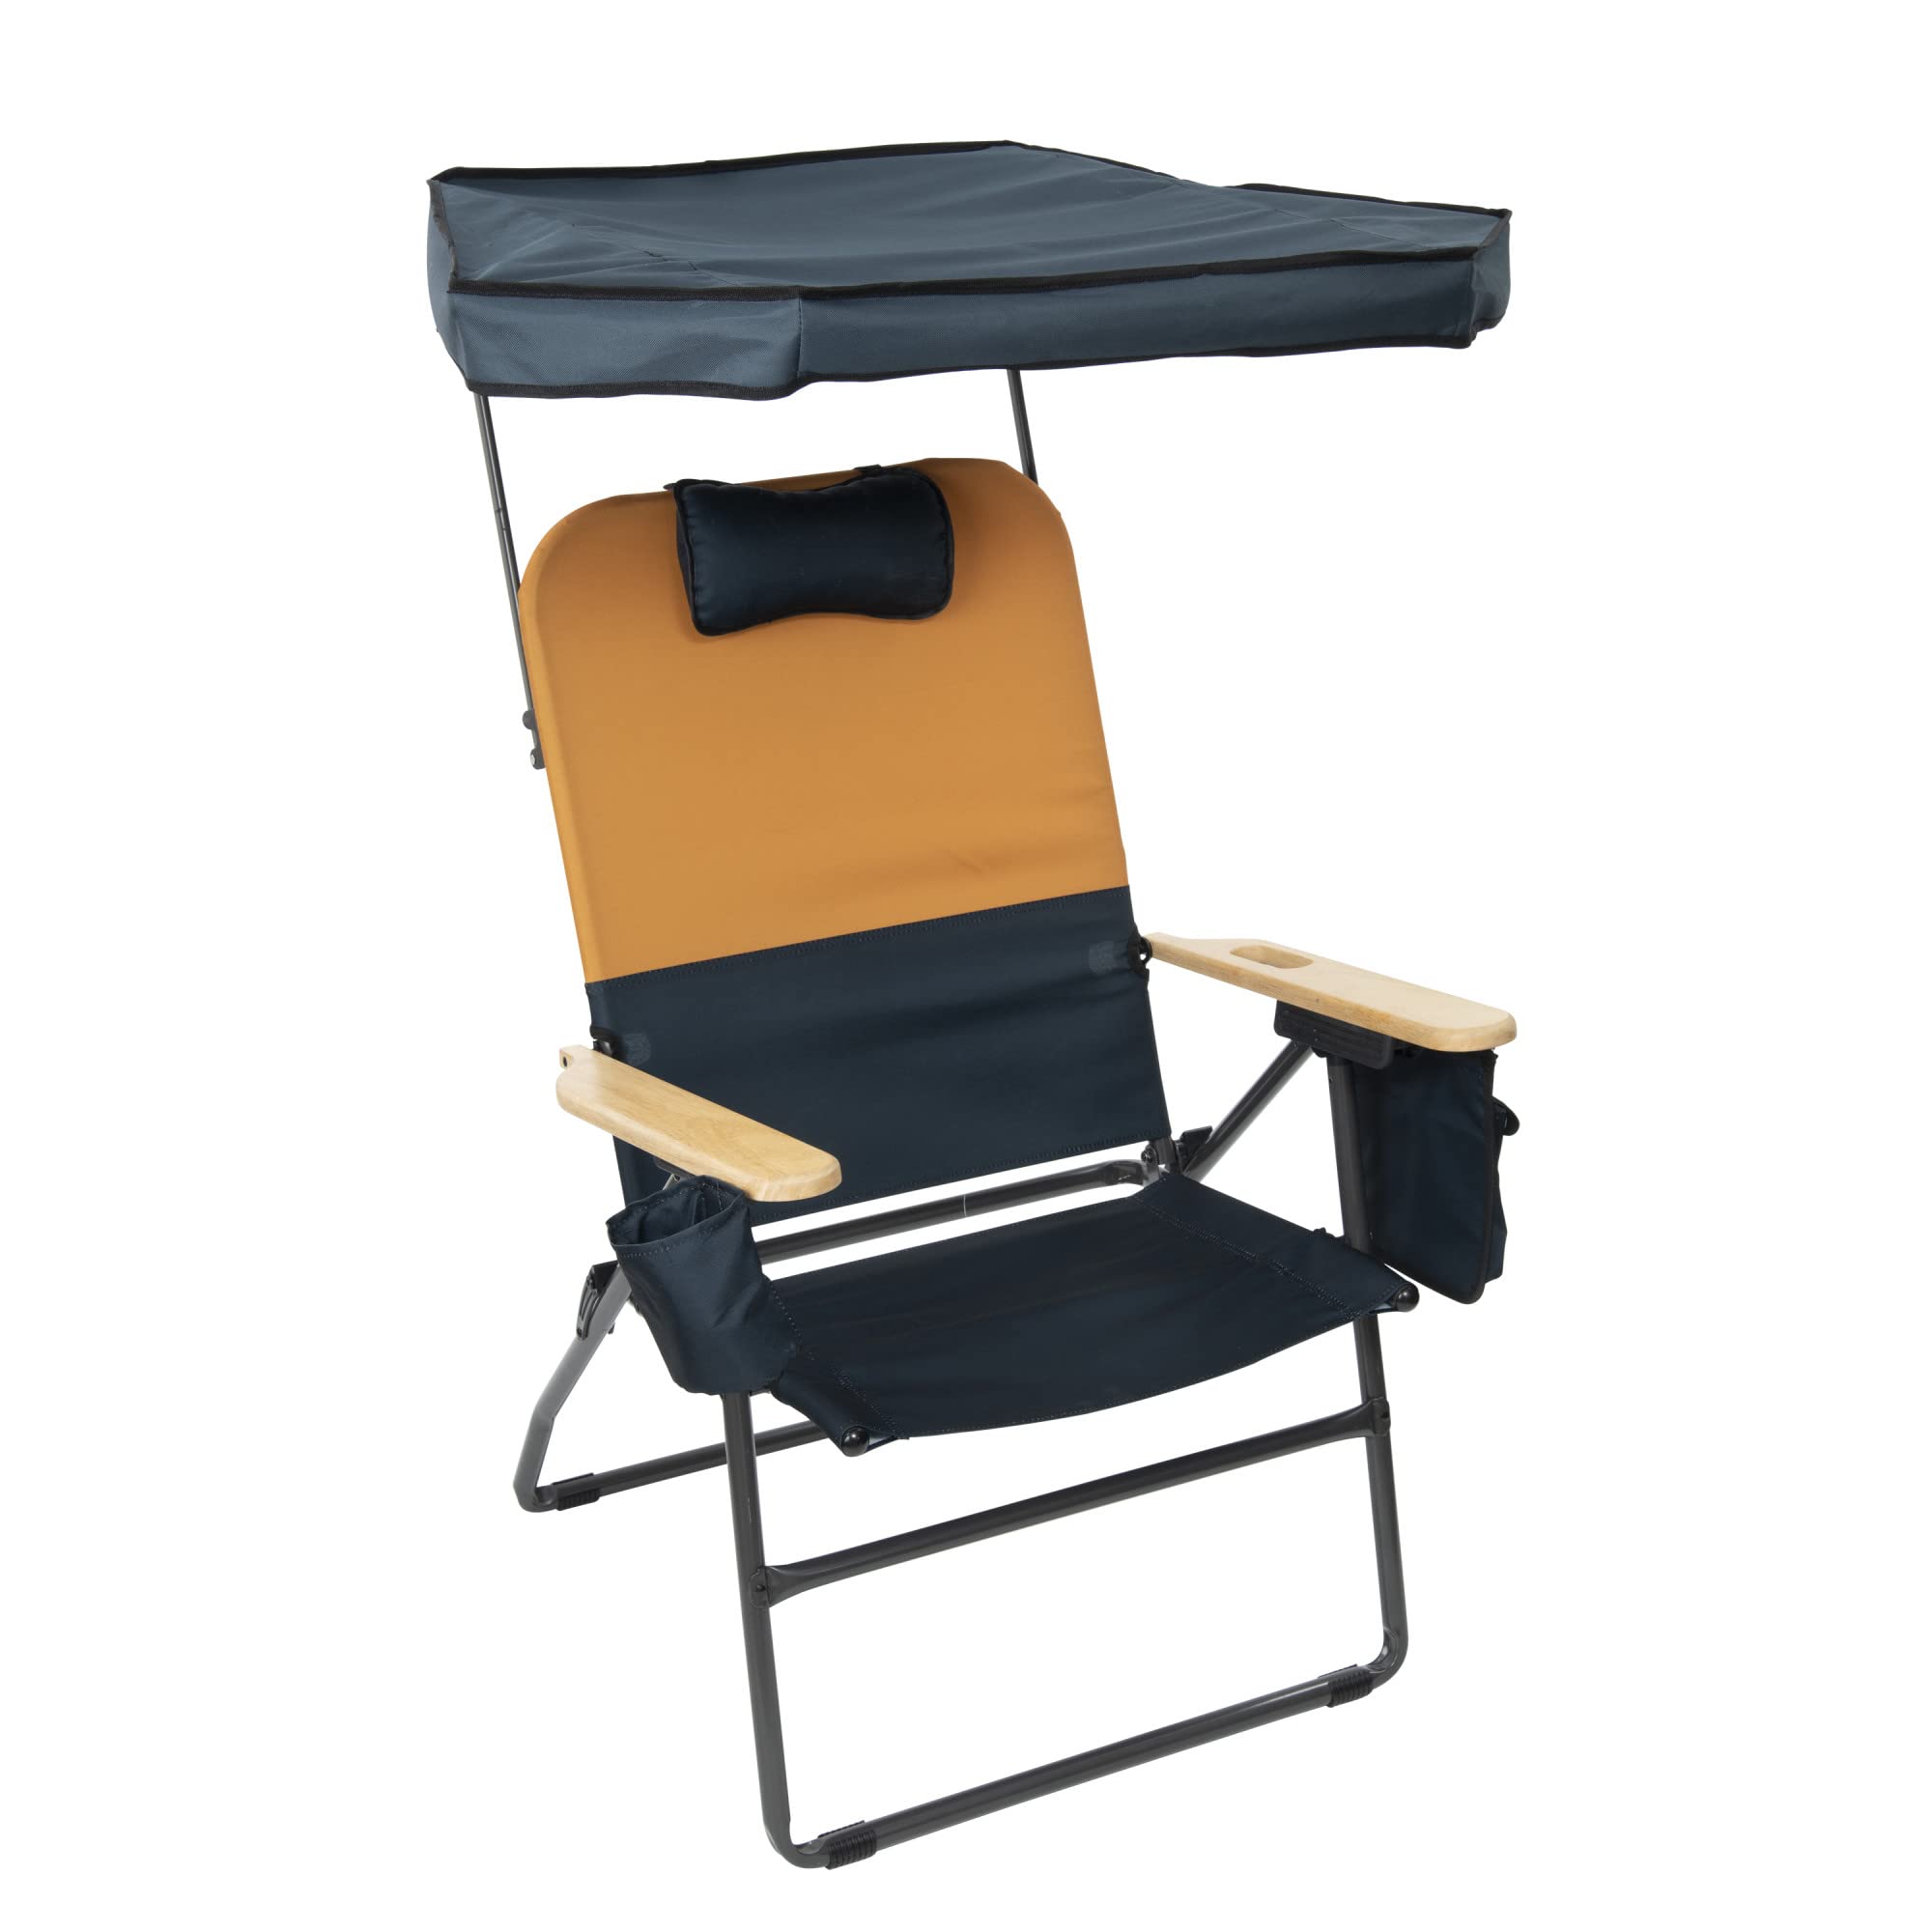 SELKIRK 4 POSITION CHAIR